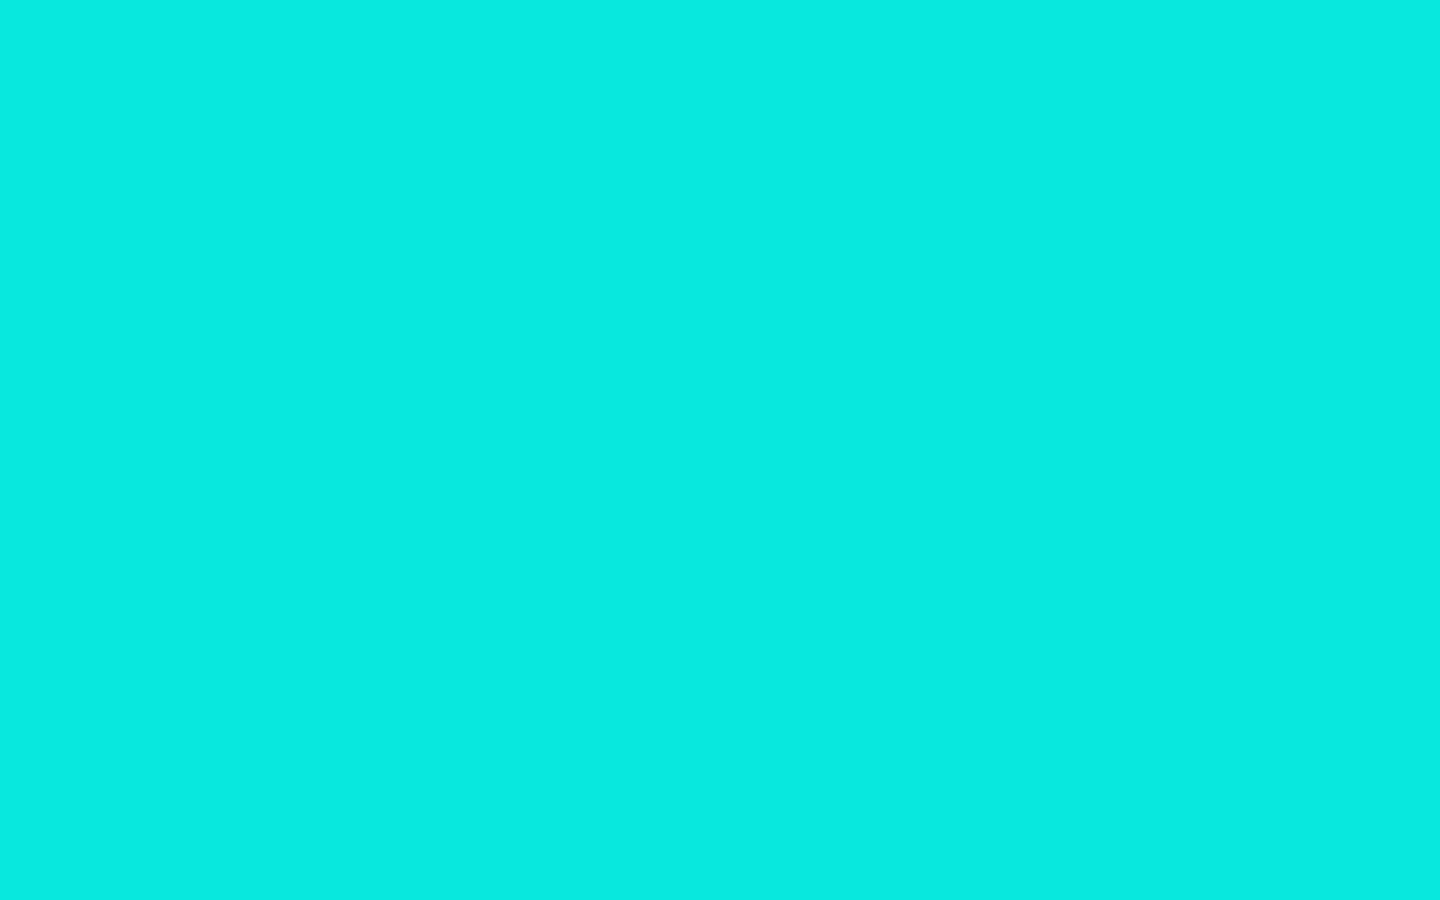 Solid Turquoise Background Bright